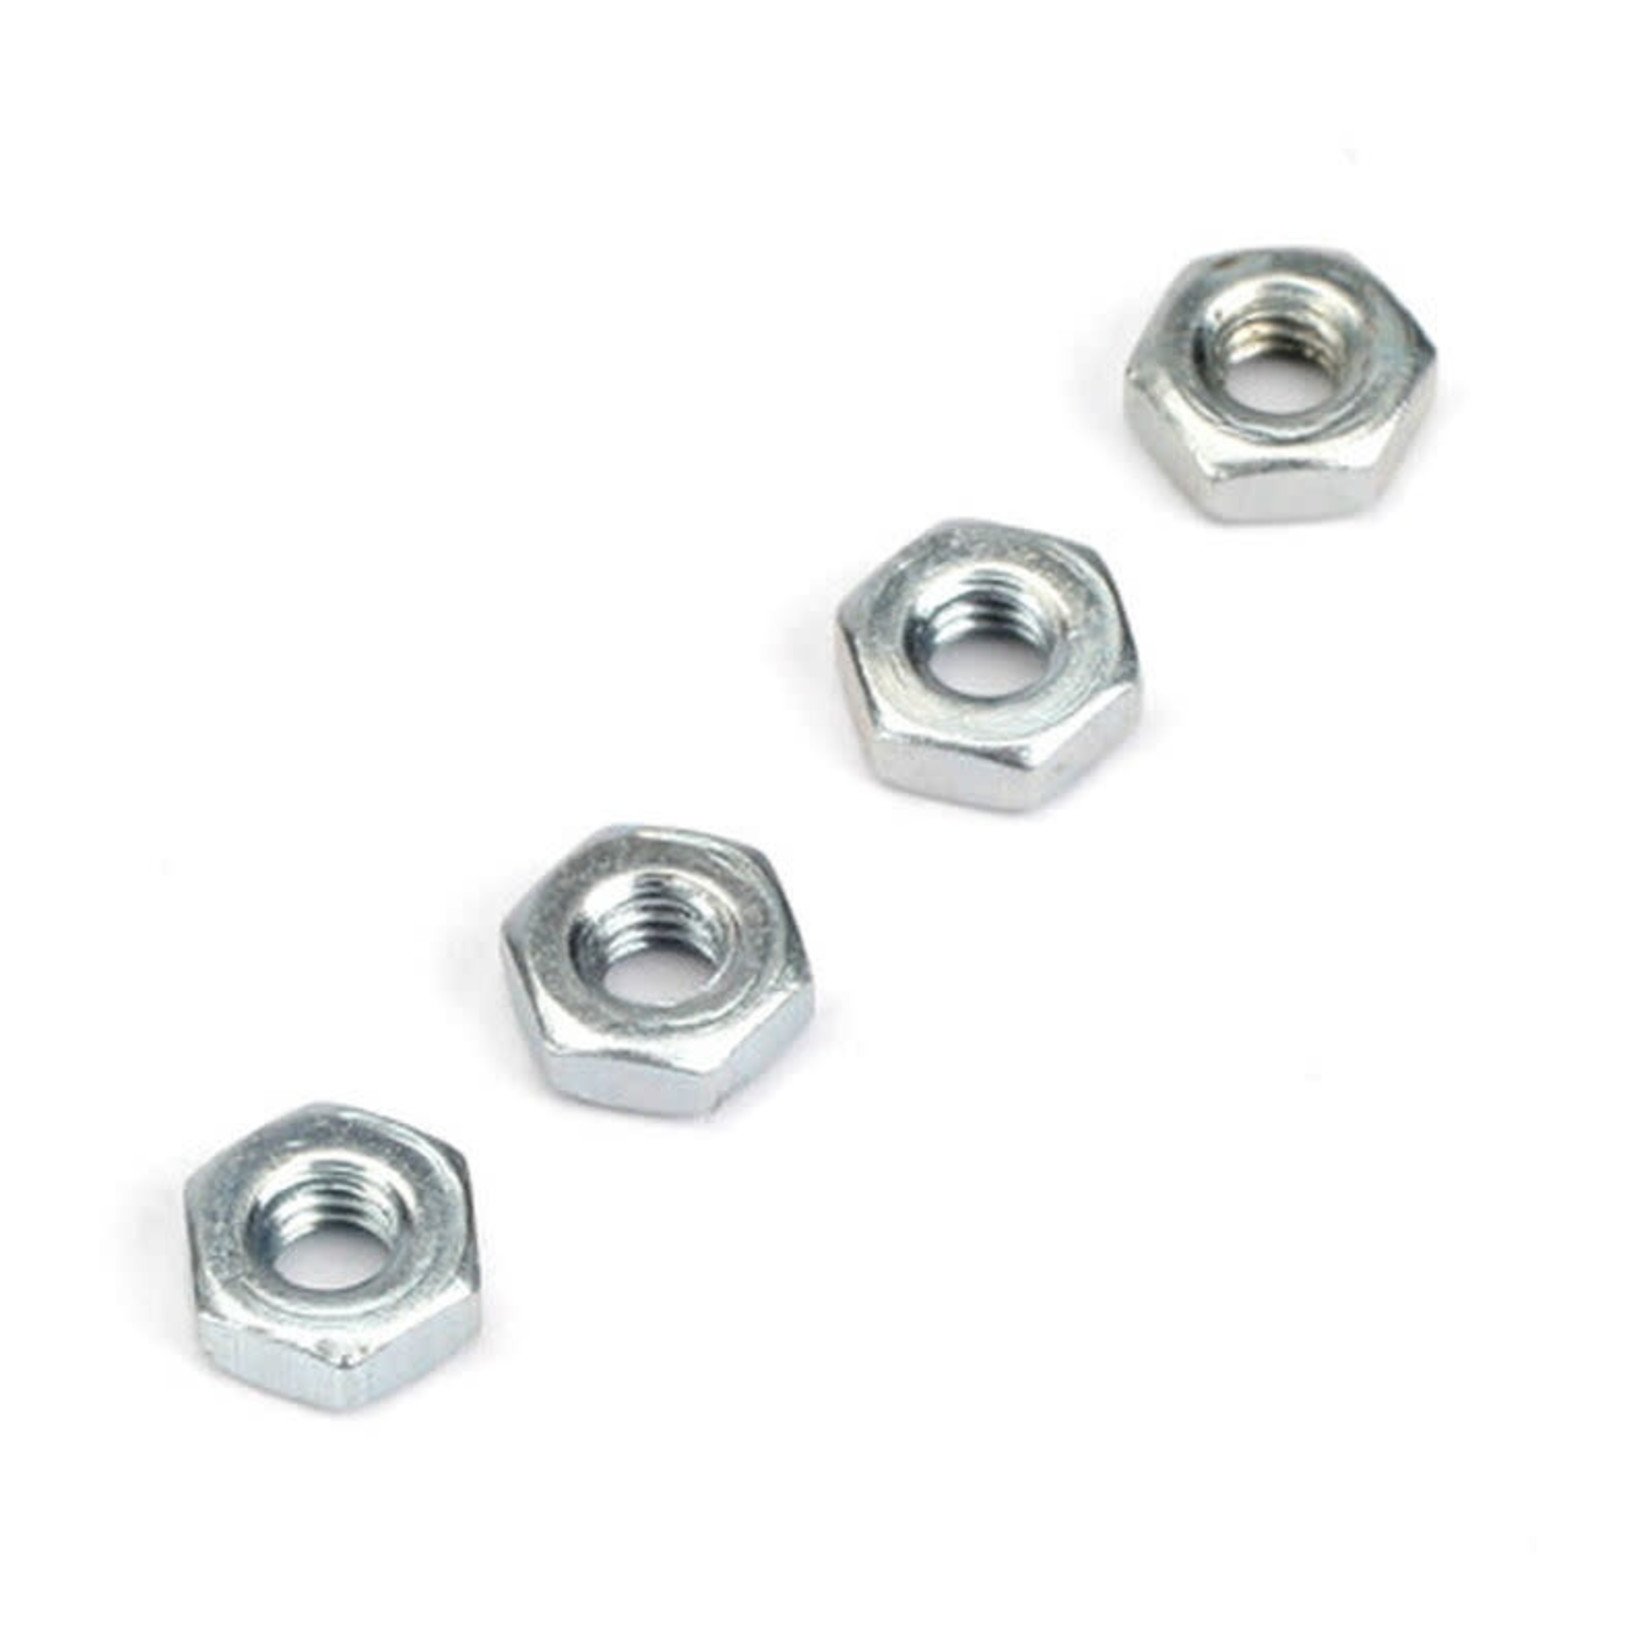 DuBro DUB2104 DuBro Hex Nuts,2.5mm